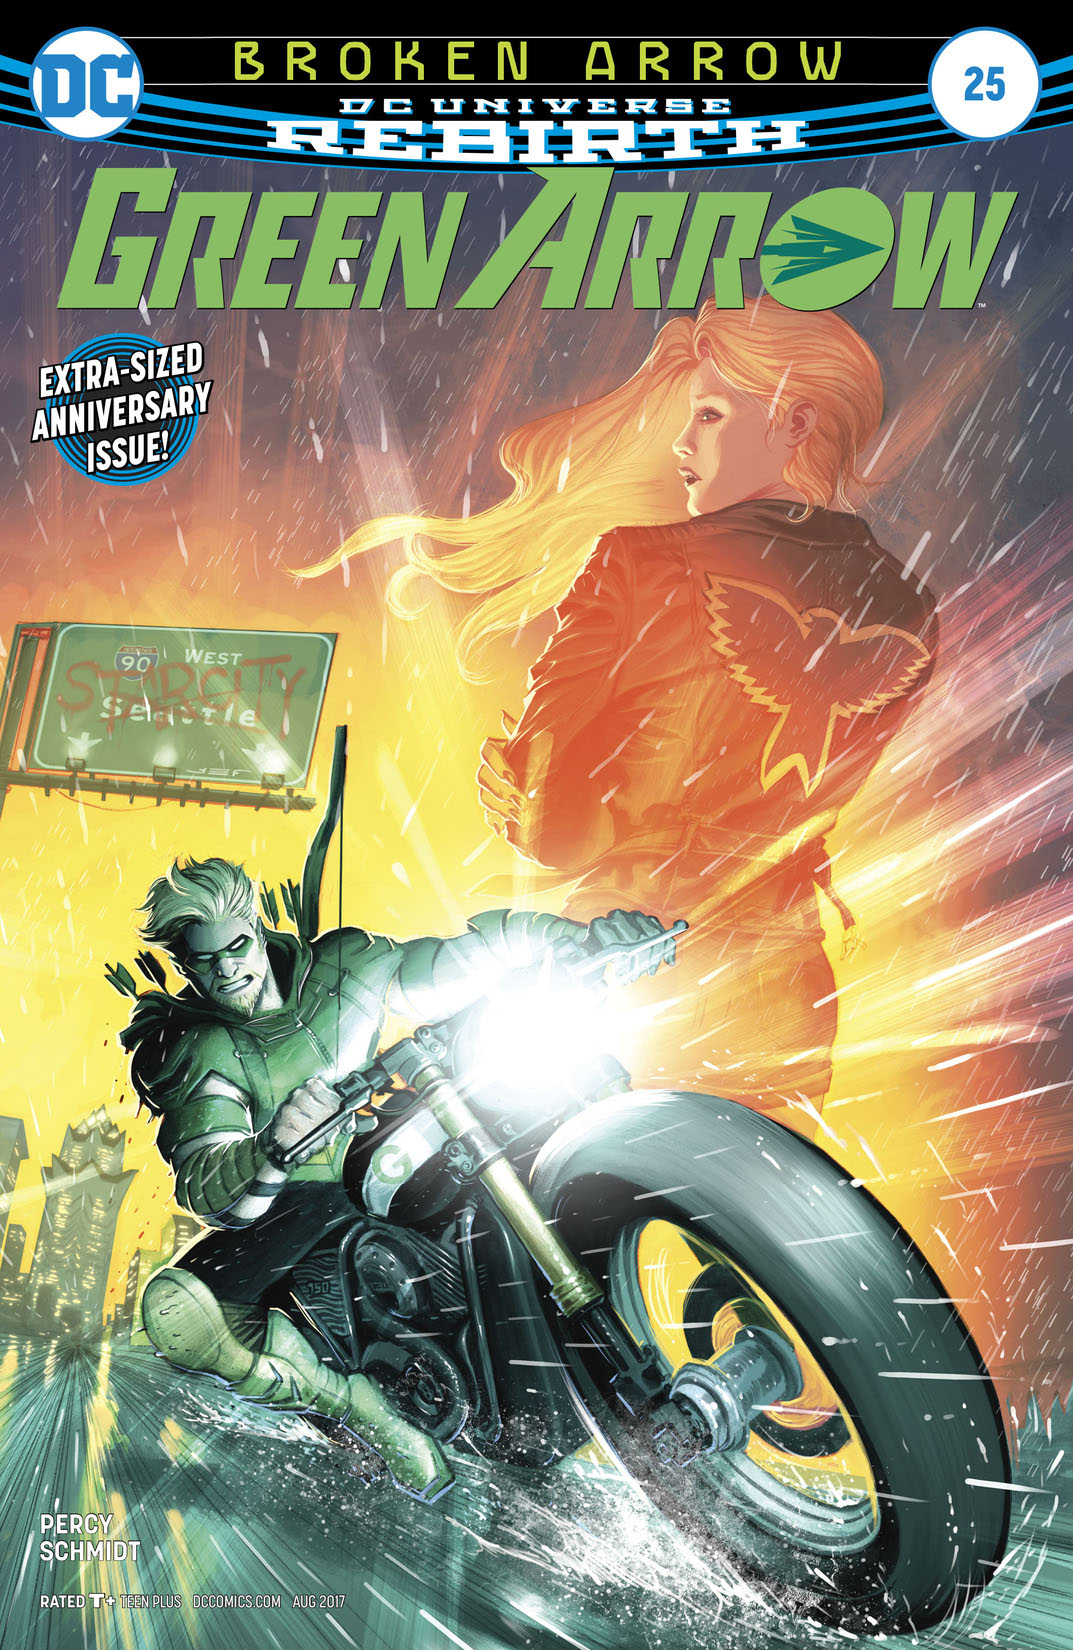 Green Arrow (2016-) #25 preview images